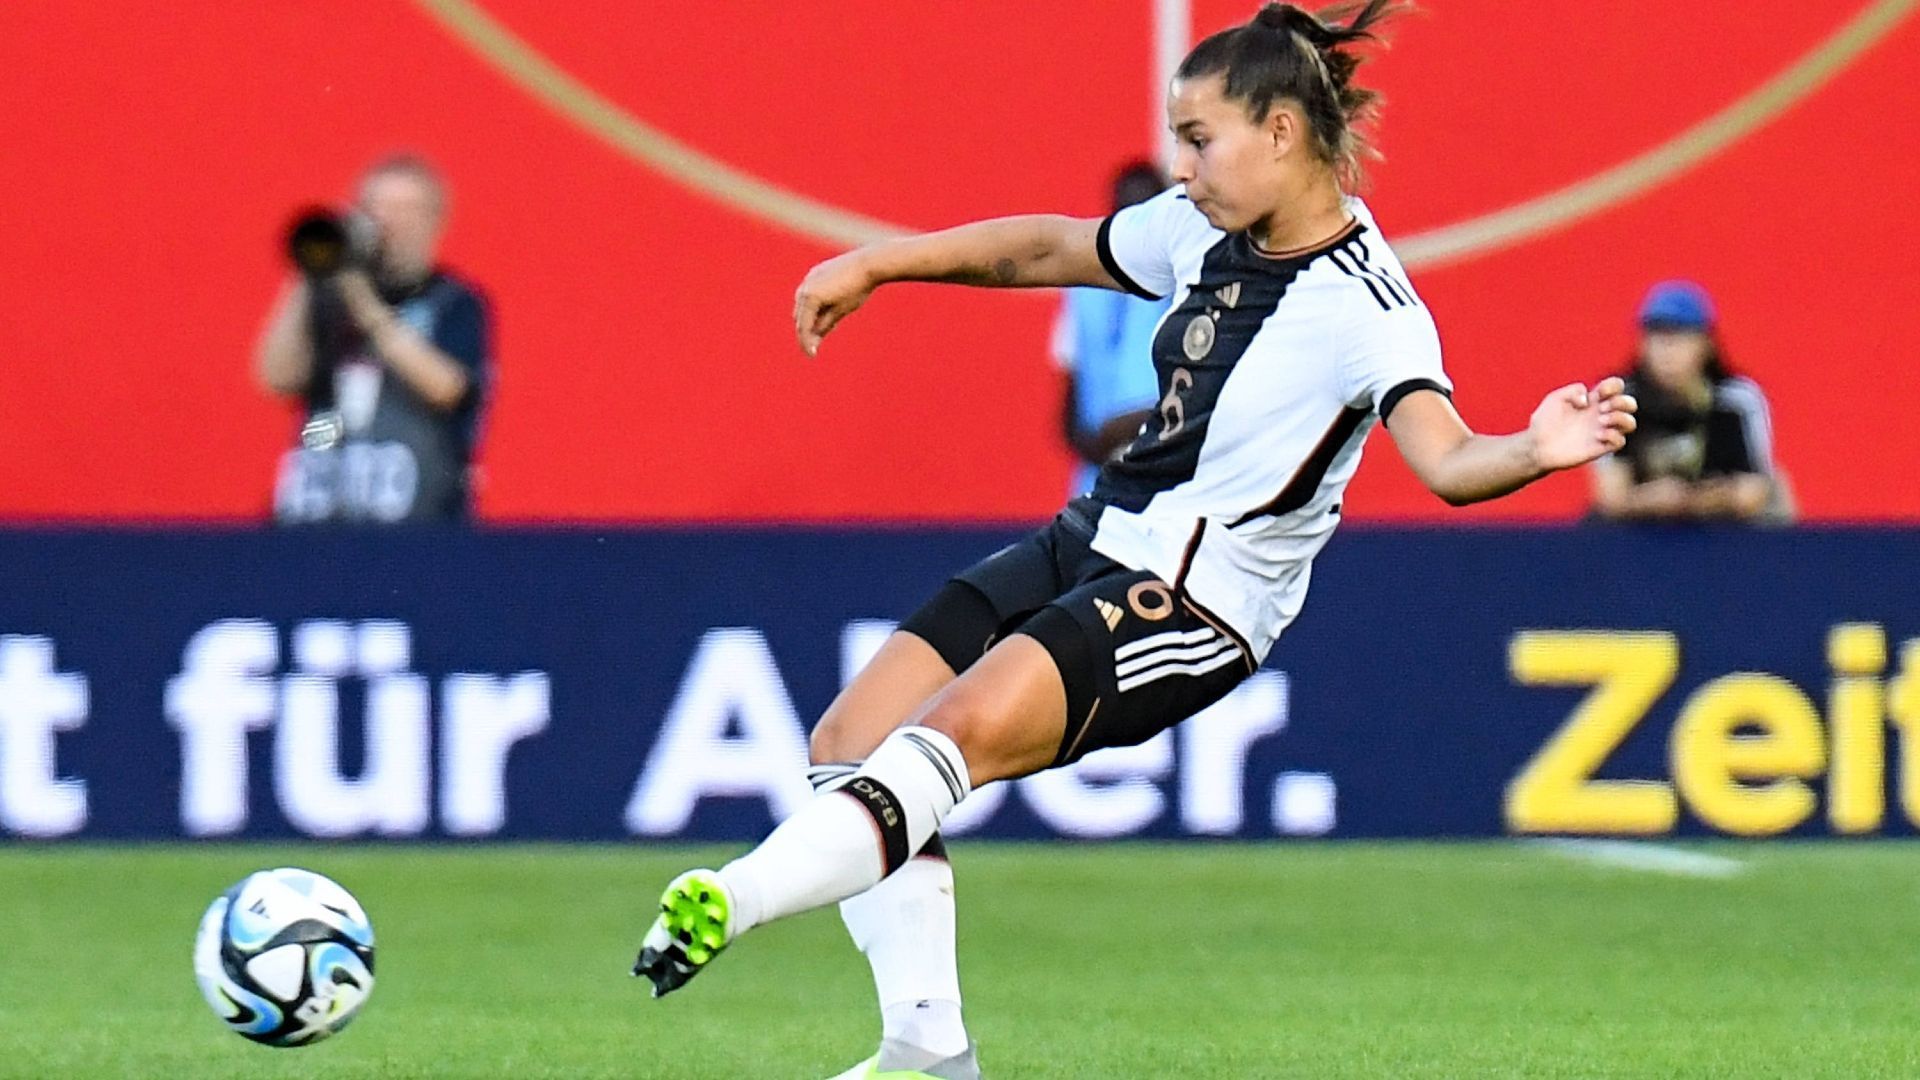 
                <strong>Lena Oberdorf</strong><br>
                &#x2022; <strong>Position: </strong>Mittelfeld/Angriff<br>&#x2022; <strong>Verein: </strong>VfL Wolfsburg<br>&#x2022; <strong>Trikotnummer: </strong><br>&#x2022; <strong>Alter: </strong><br>&#x2022; <strong>Länderspiele: </strong><br>&#x2022; <strong>Länderspiel-Tore: </strong><br>
              